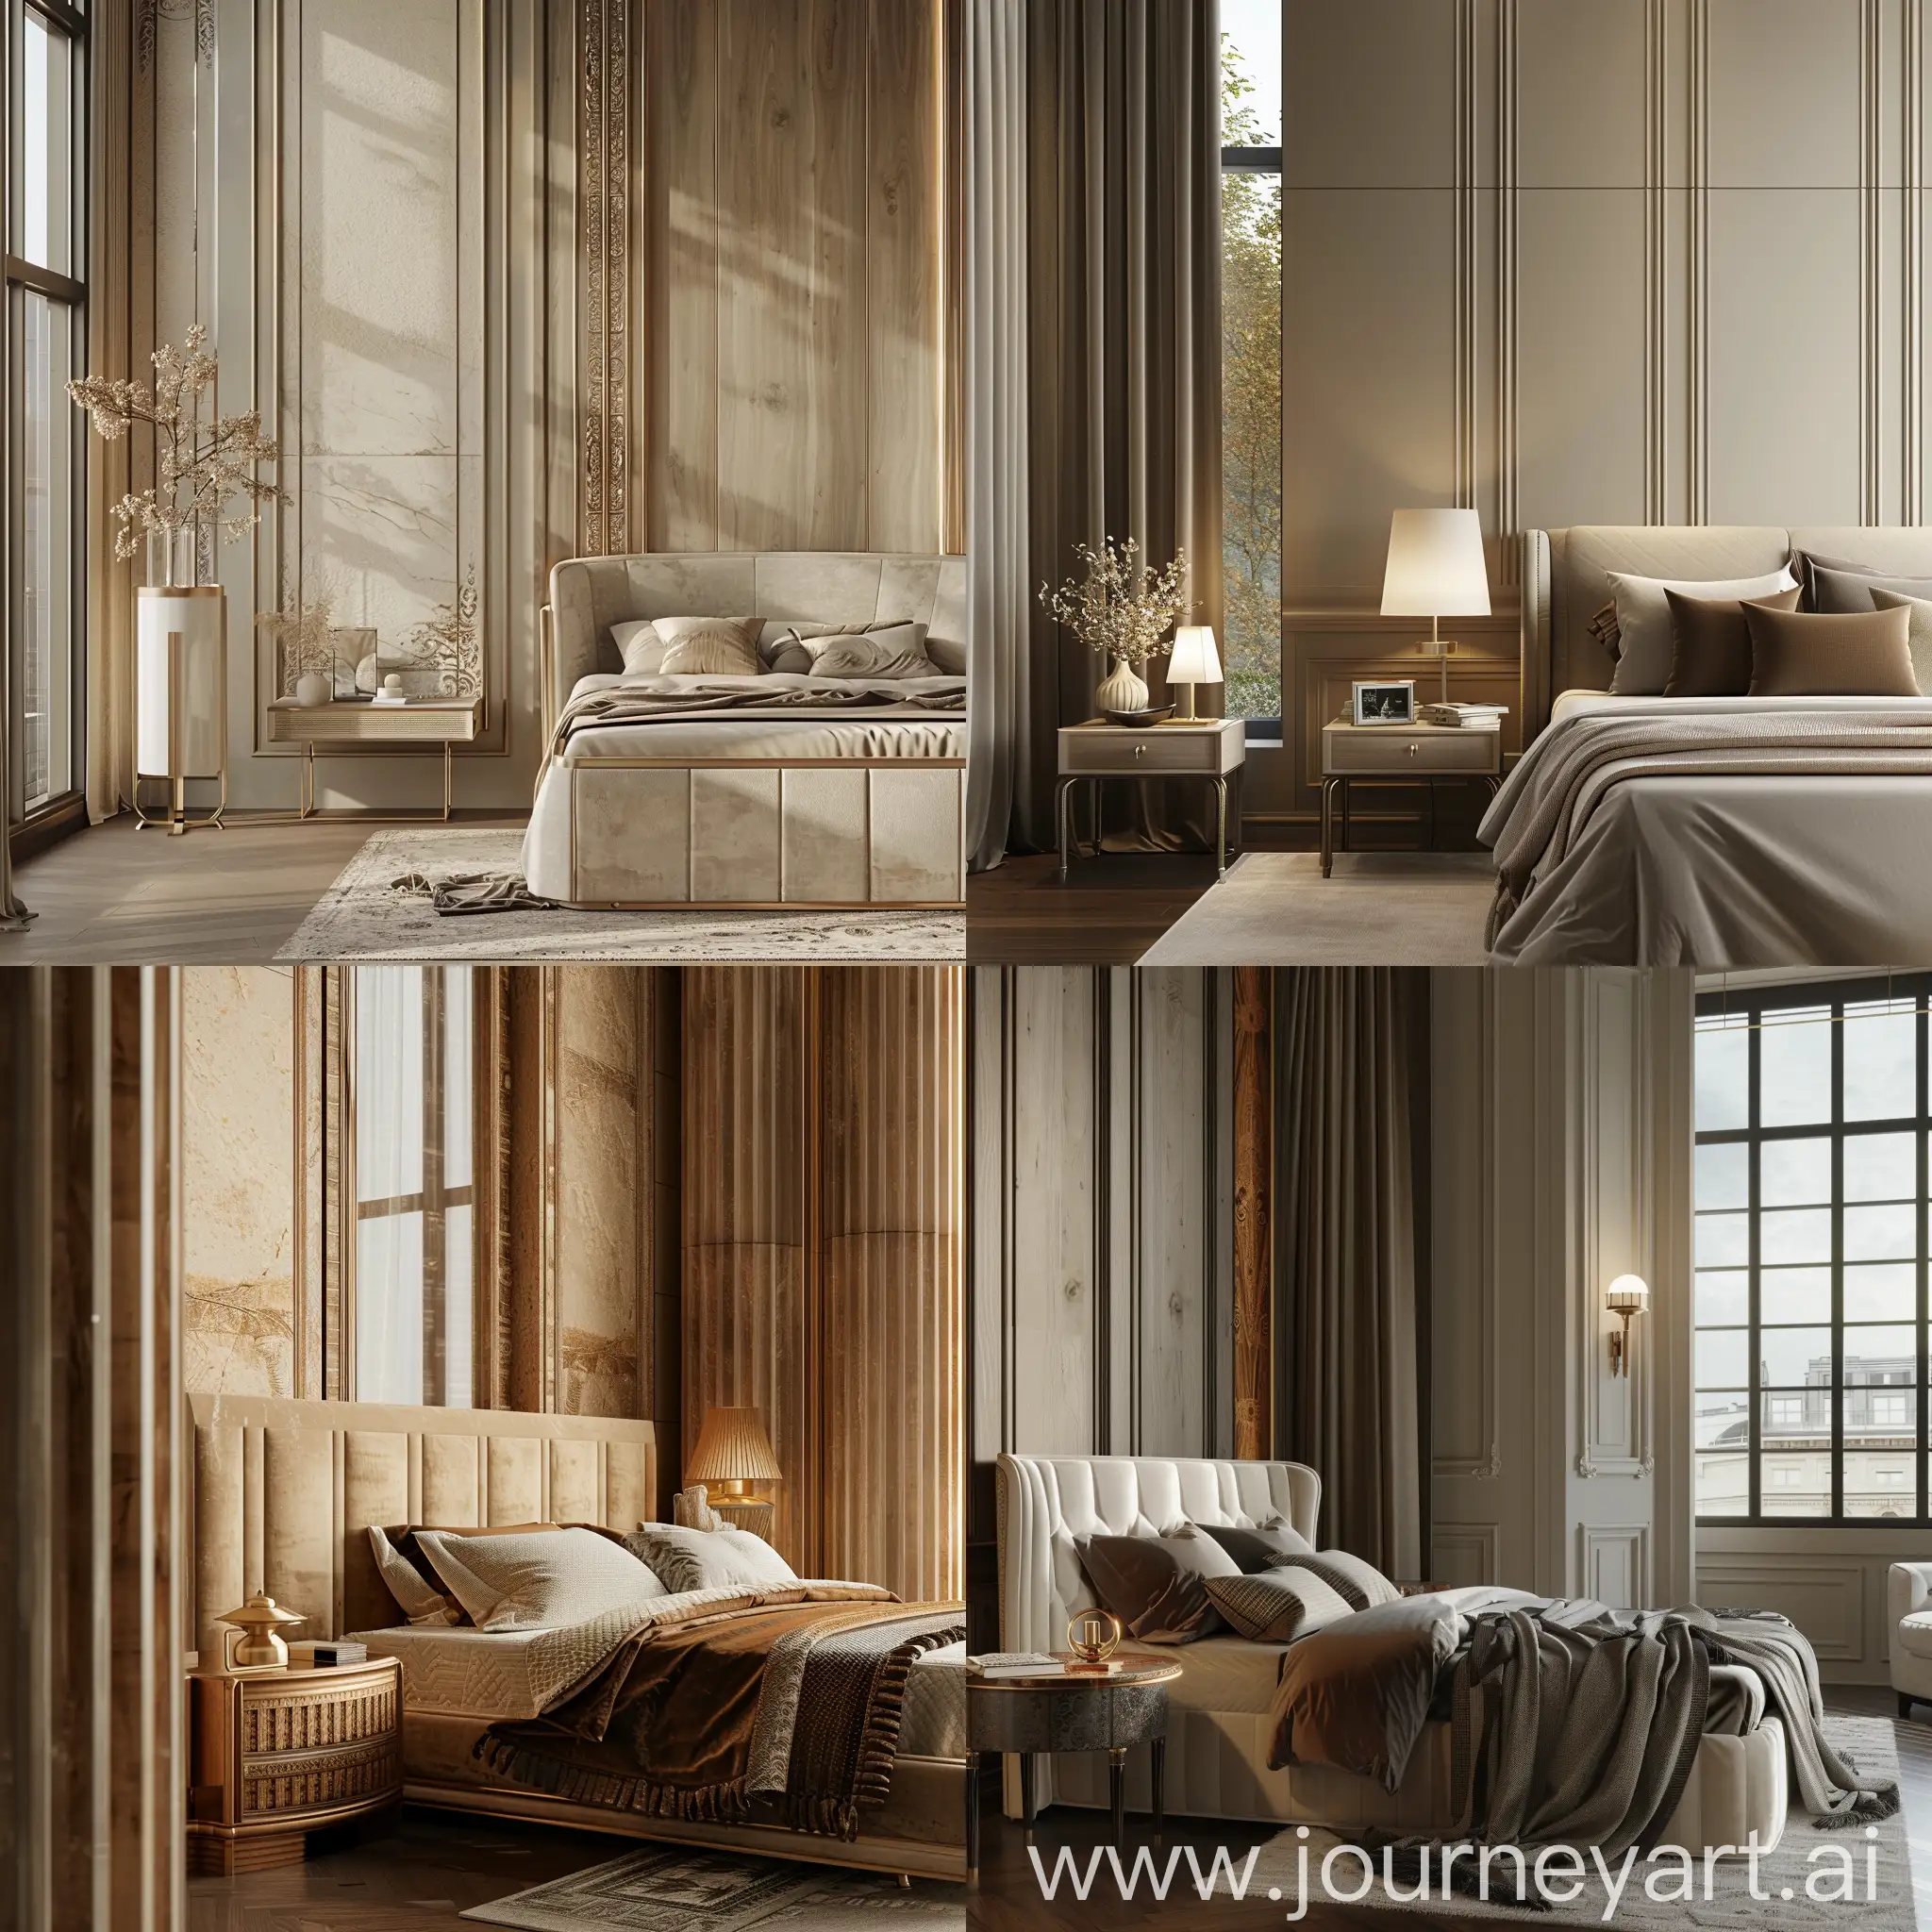 Modern greco roman luxurious bedroom, wall panelling design, bed side tables. Left side table and 50% of bed is overlapping a tall window behind